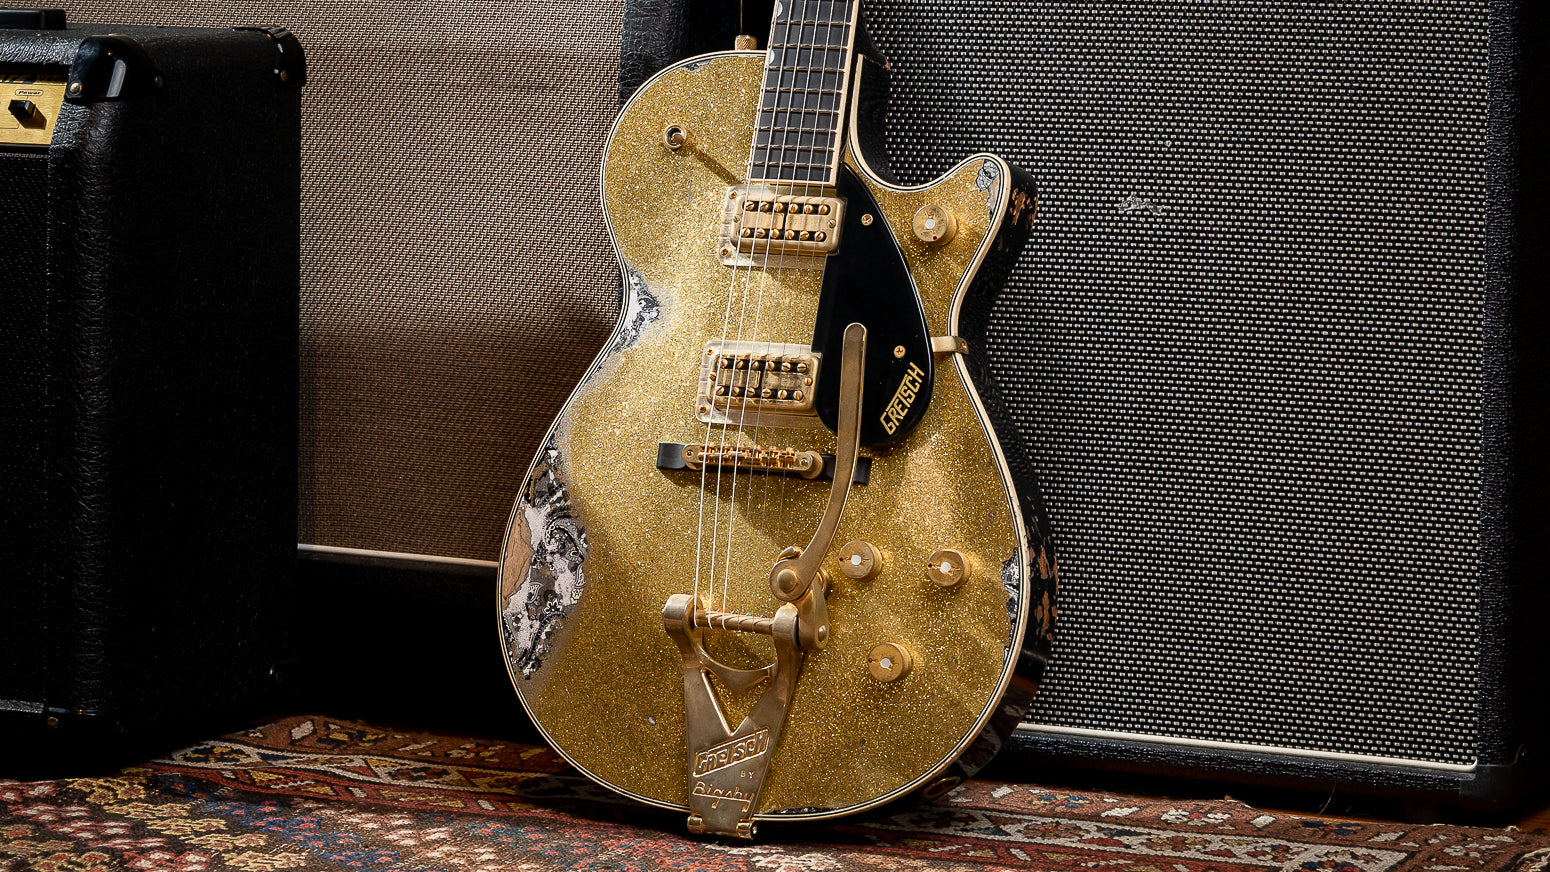 Sparks are flying - Gretsch Custom Shop Gold Sparkle Duo Jet